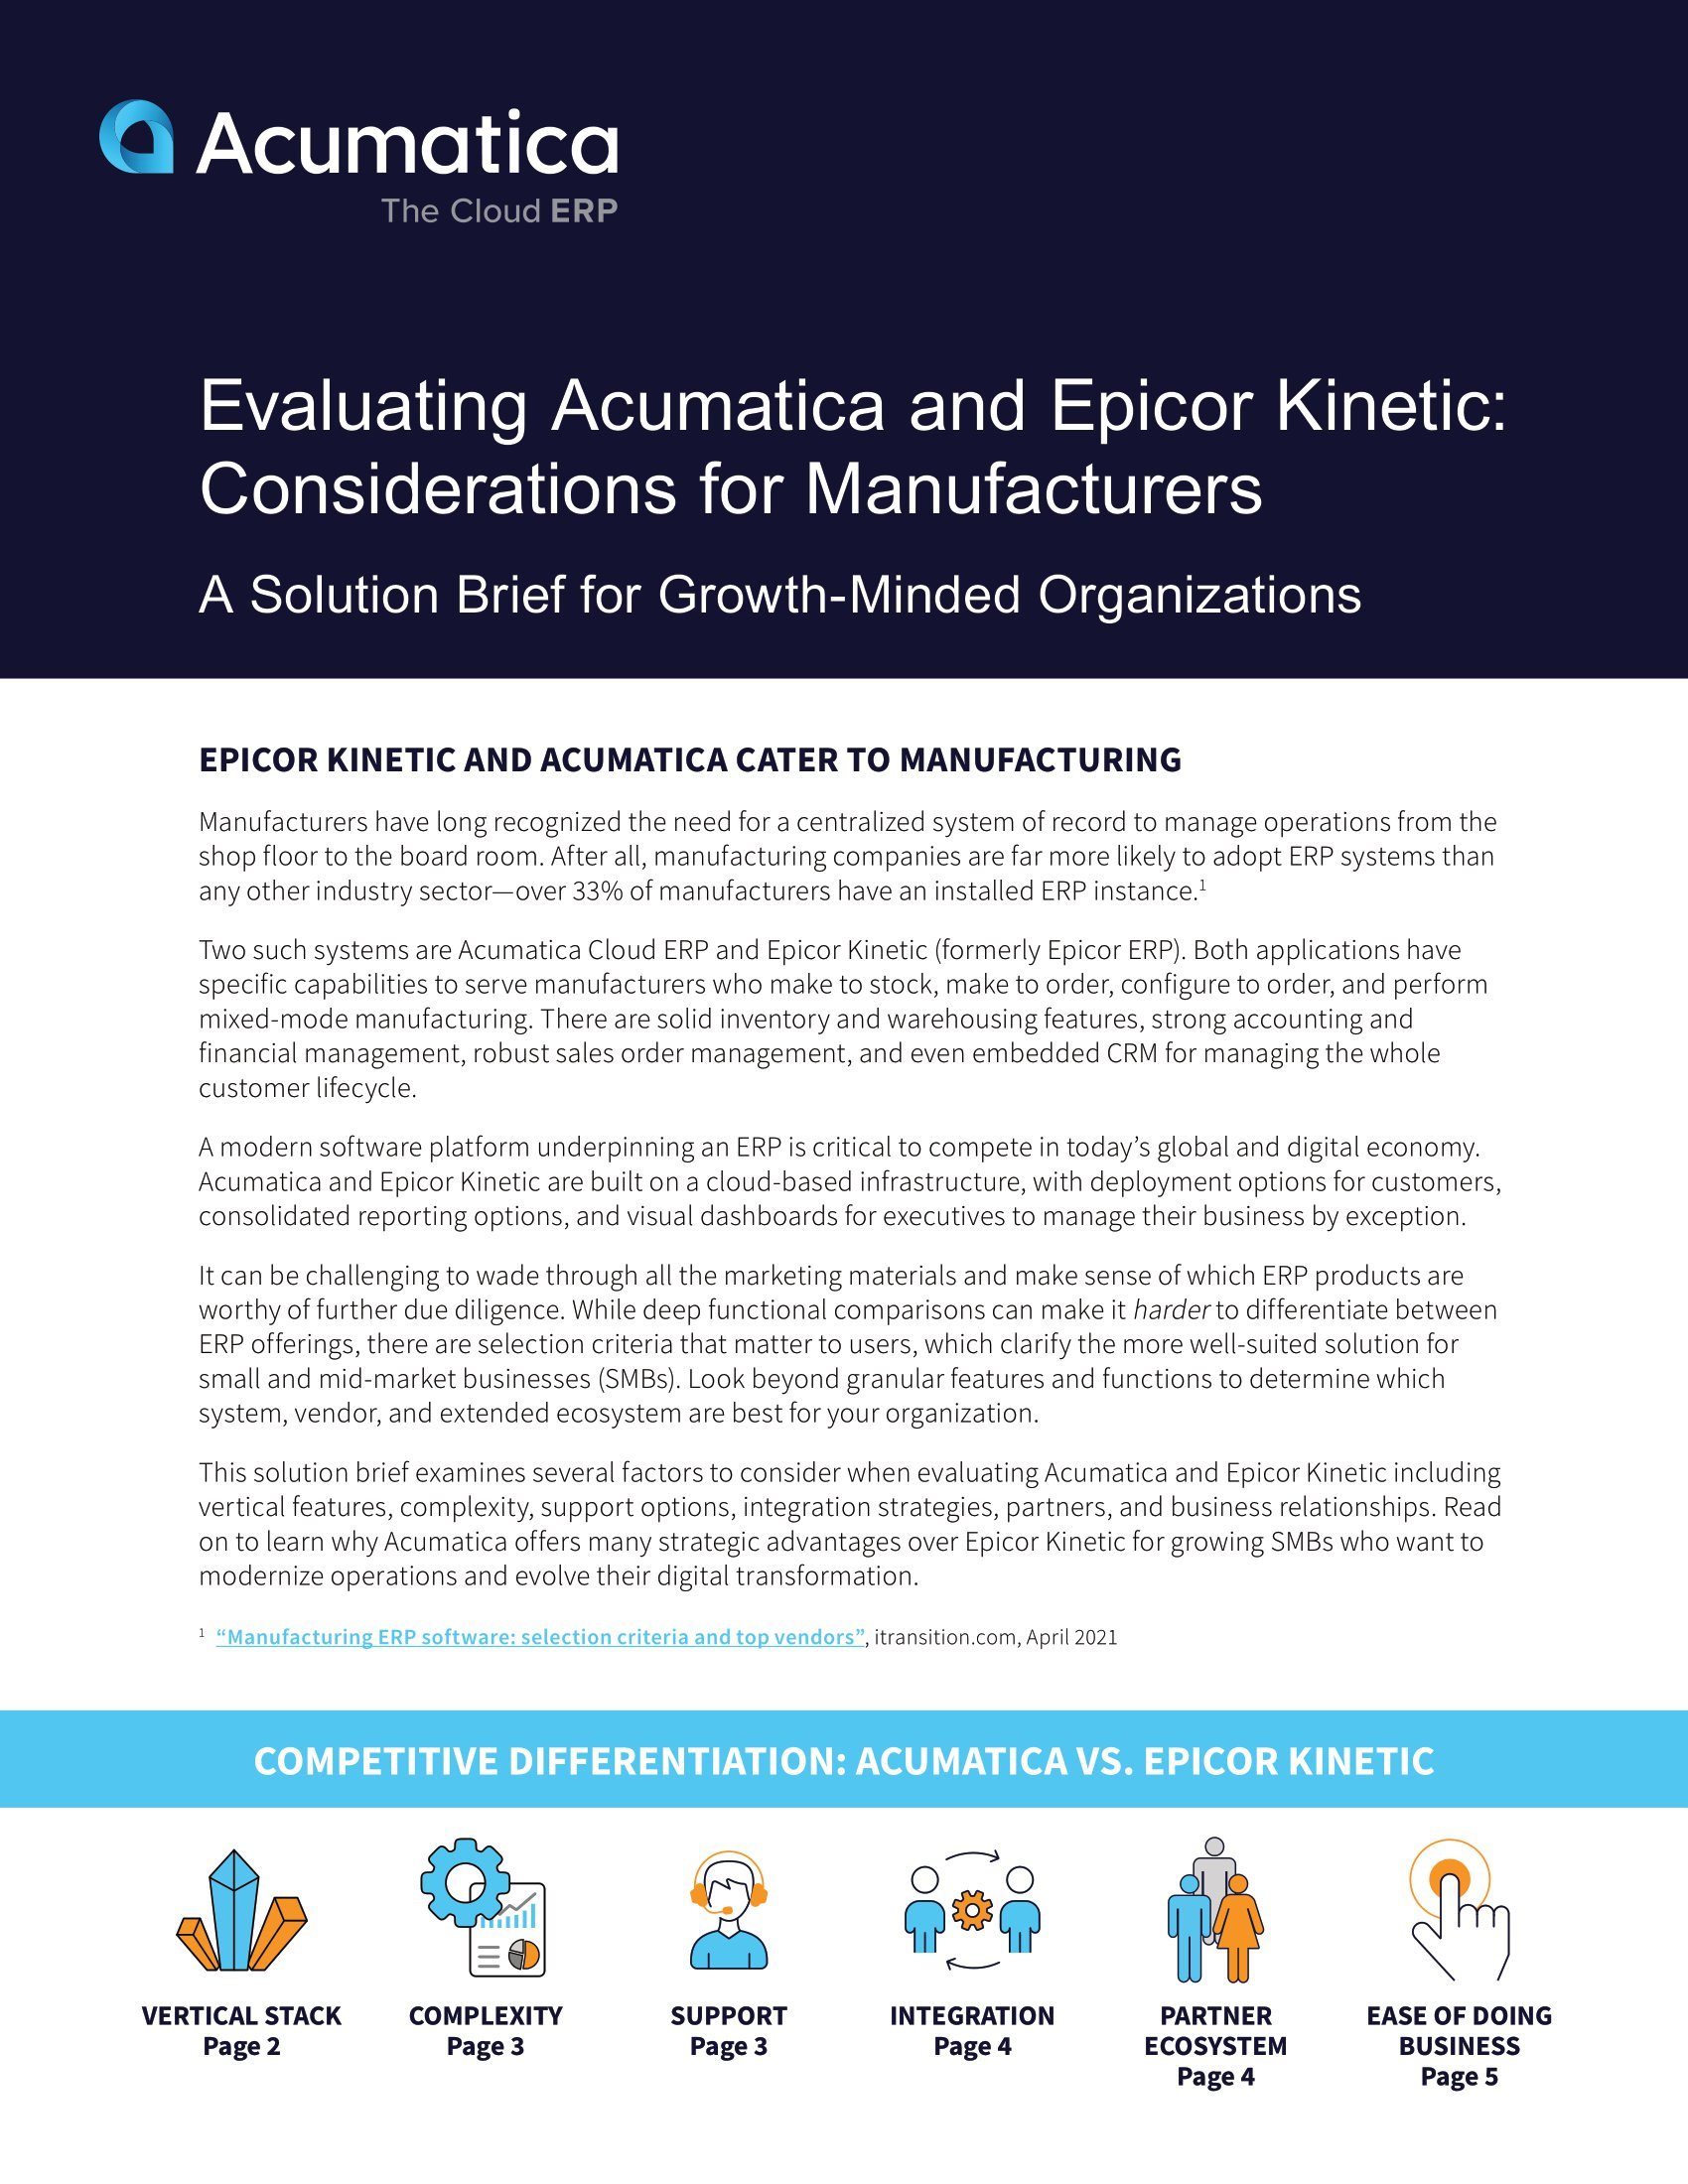 Dig Into the Differences Between Acumatica and Epicor Kinetic